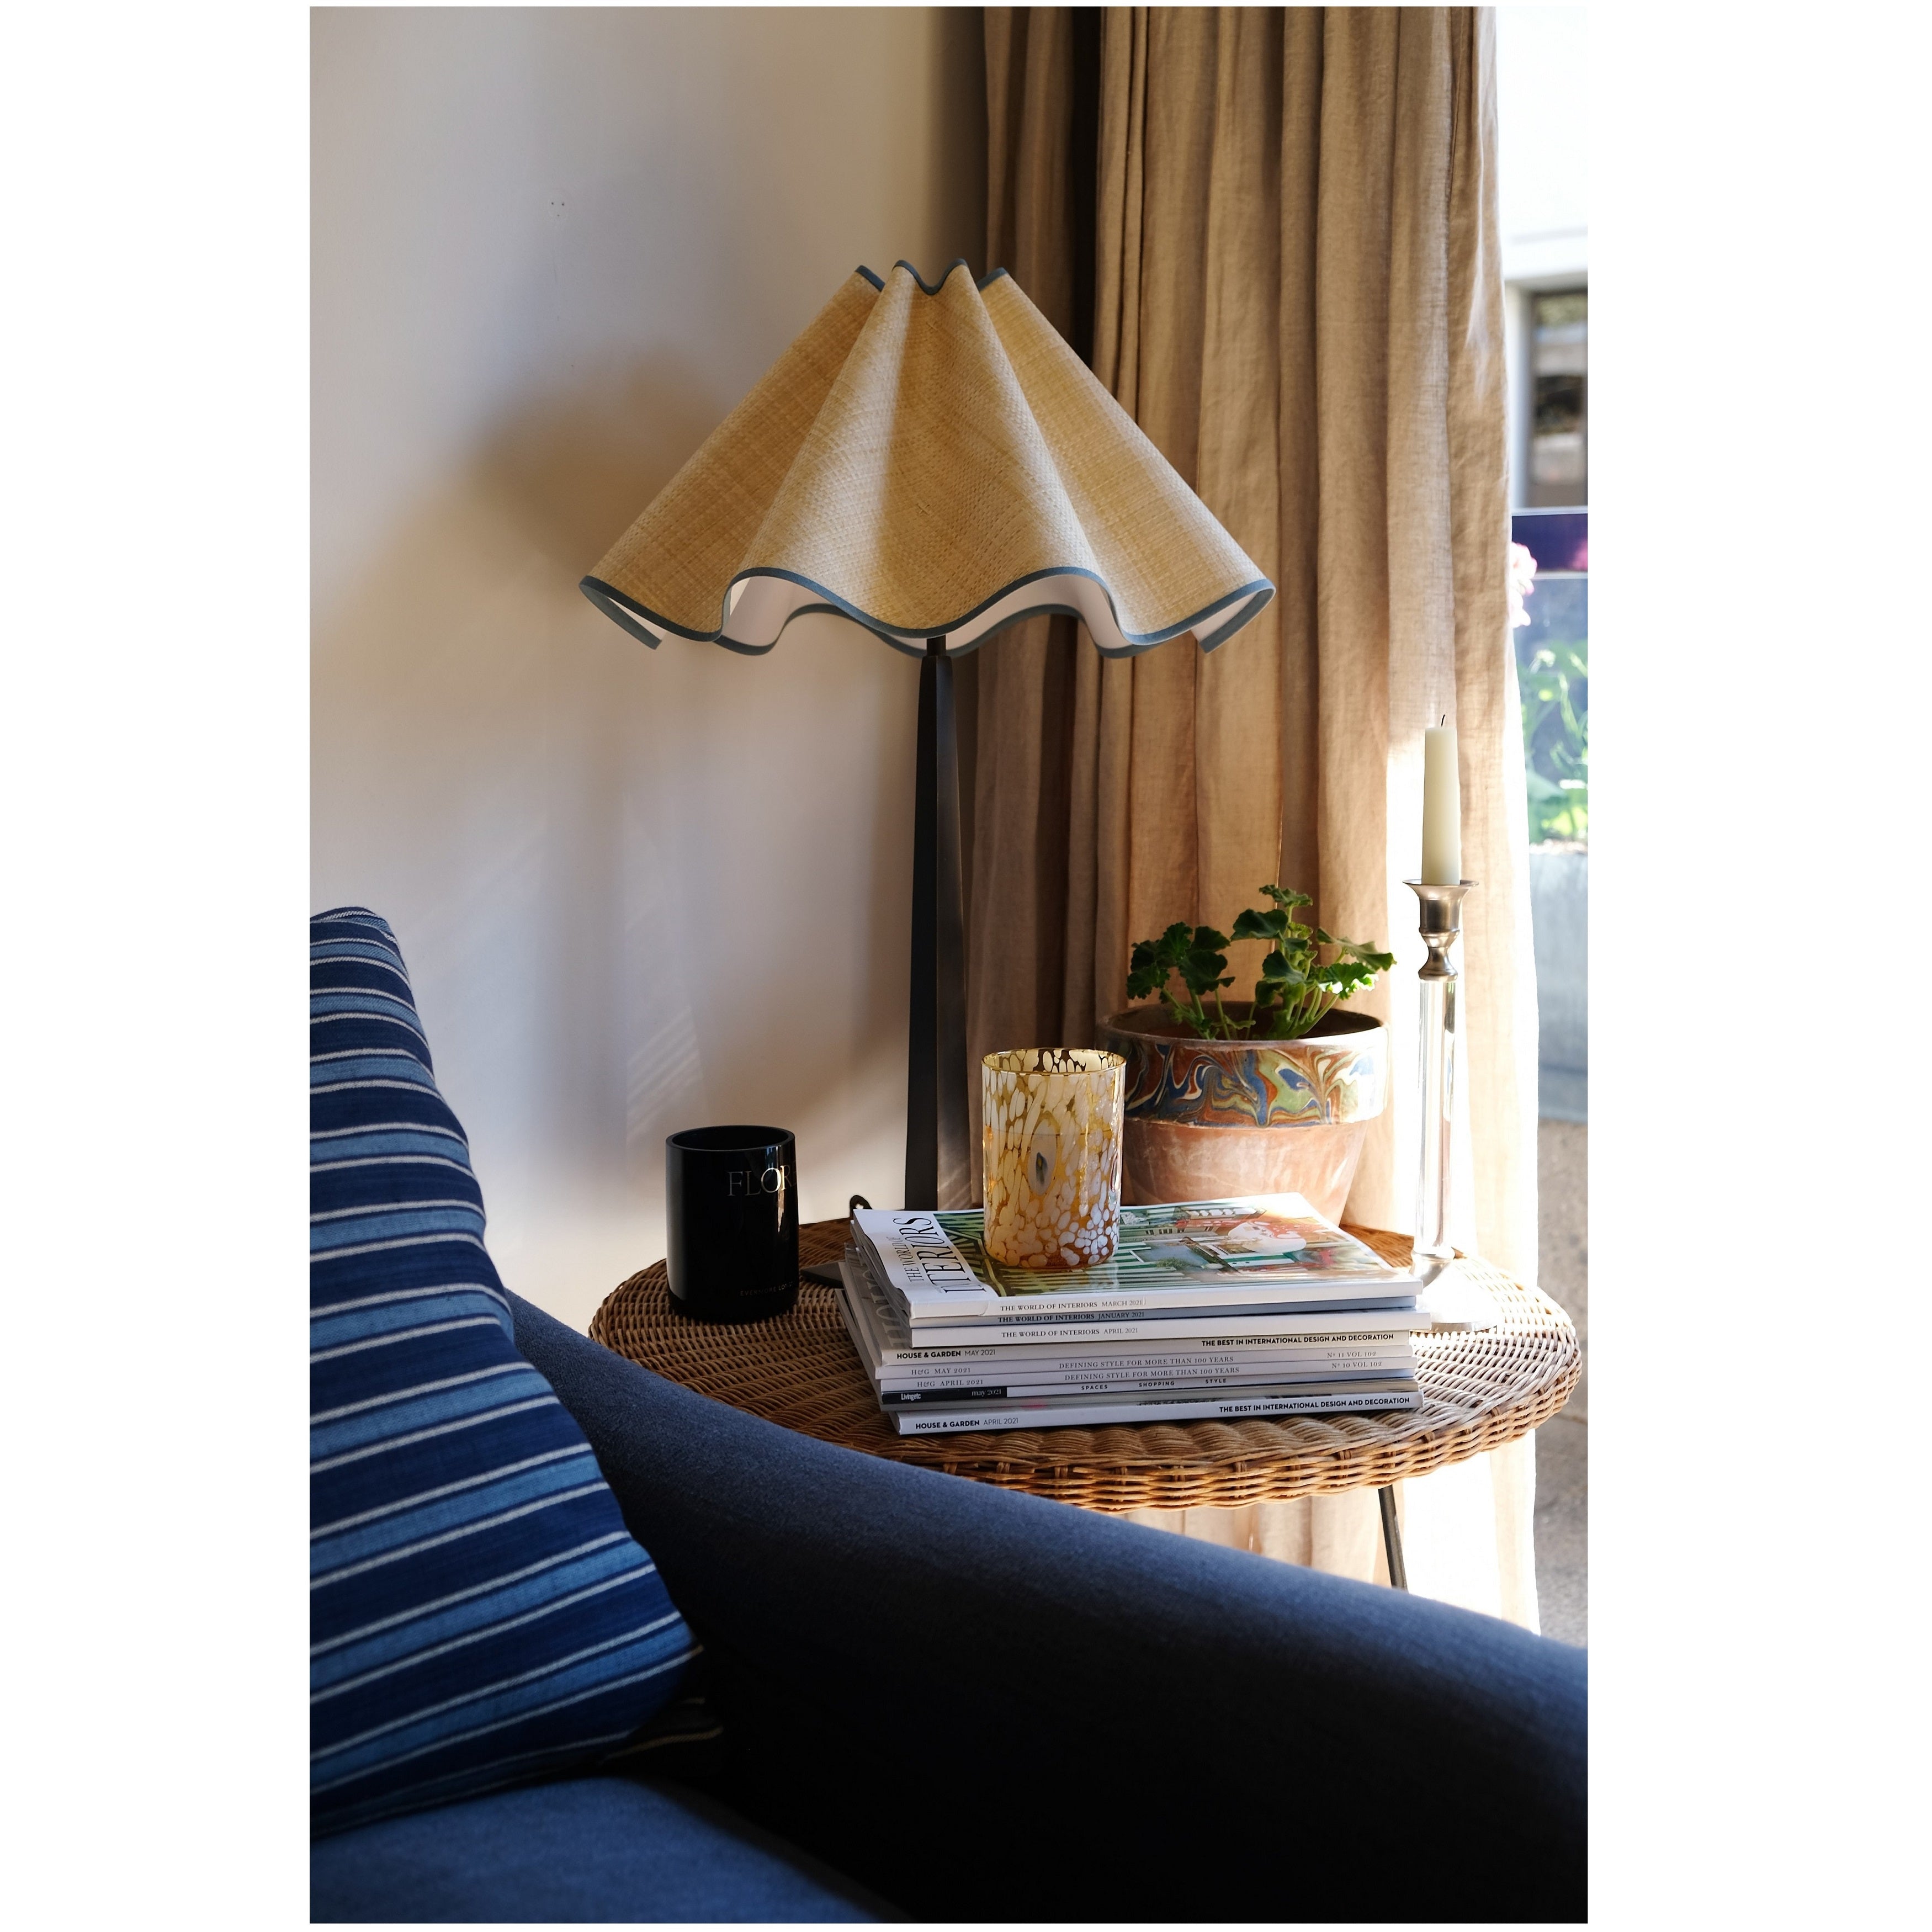 Munro and Kerr collaboration with a Considered Space woven paper rafia wavy scallop lampshade with steel blue trim